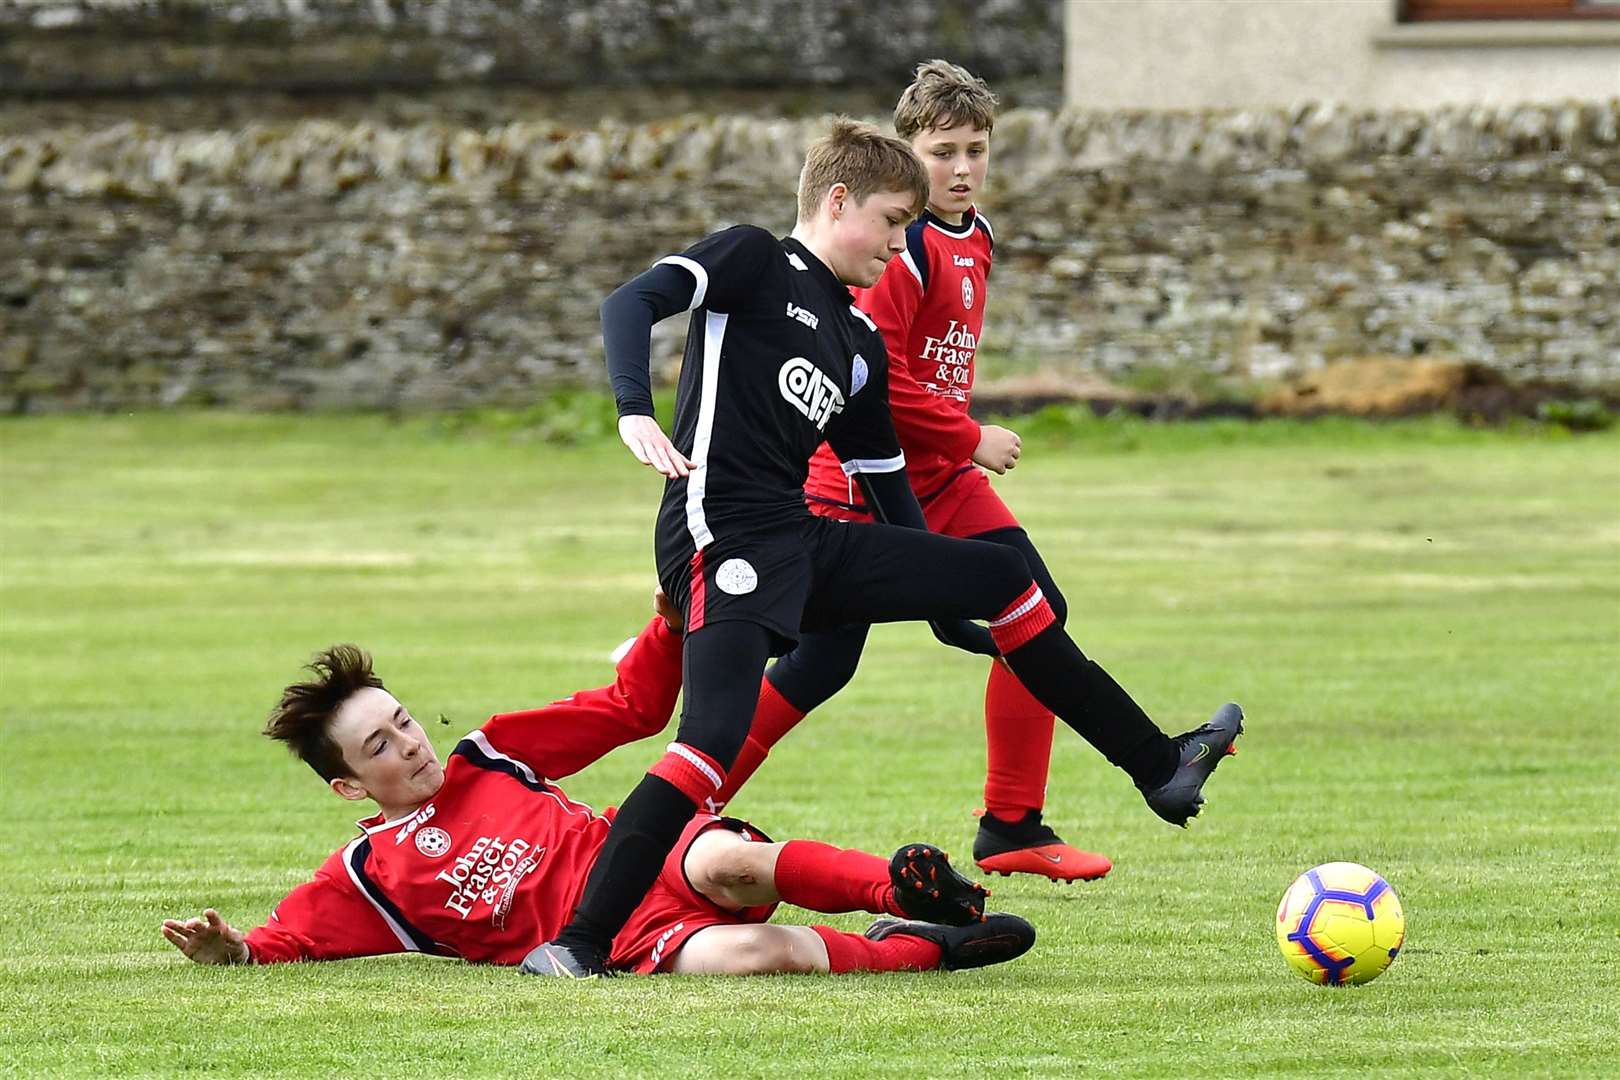 Caithness United's Sam Reid evades a challenge from a Balloan defender. Picture: Mel Roger